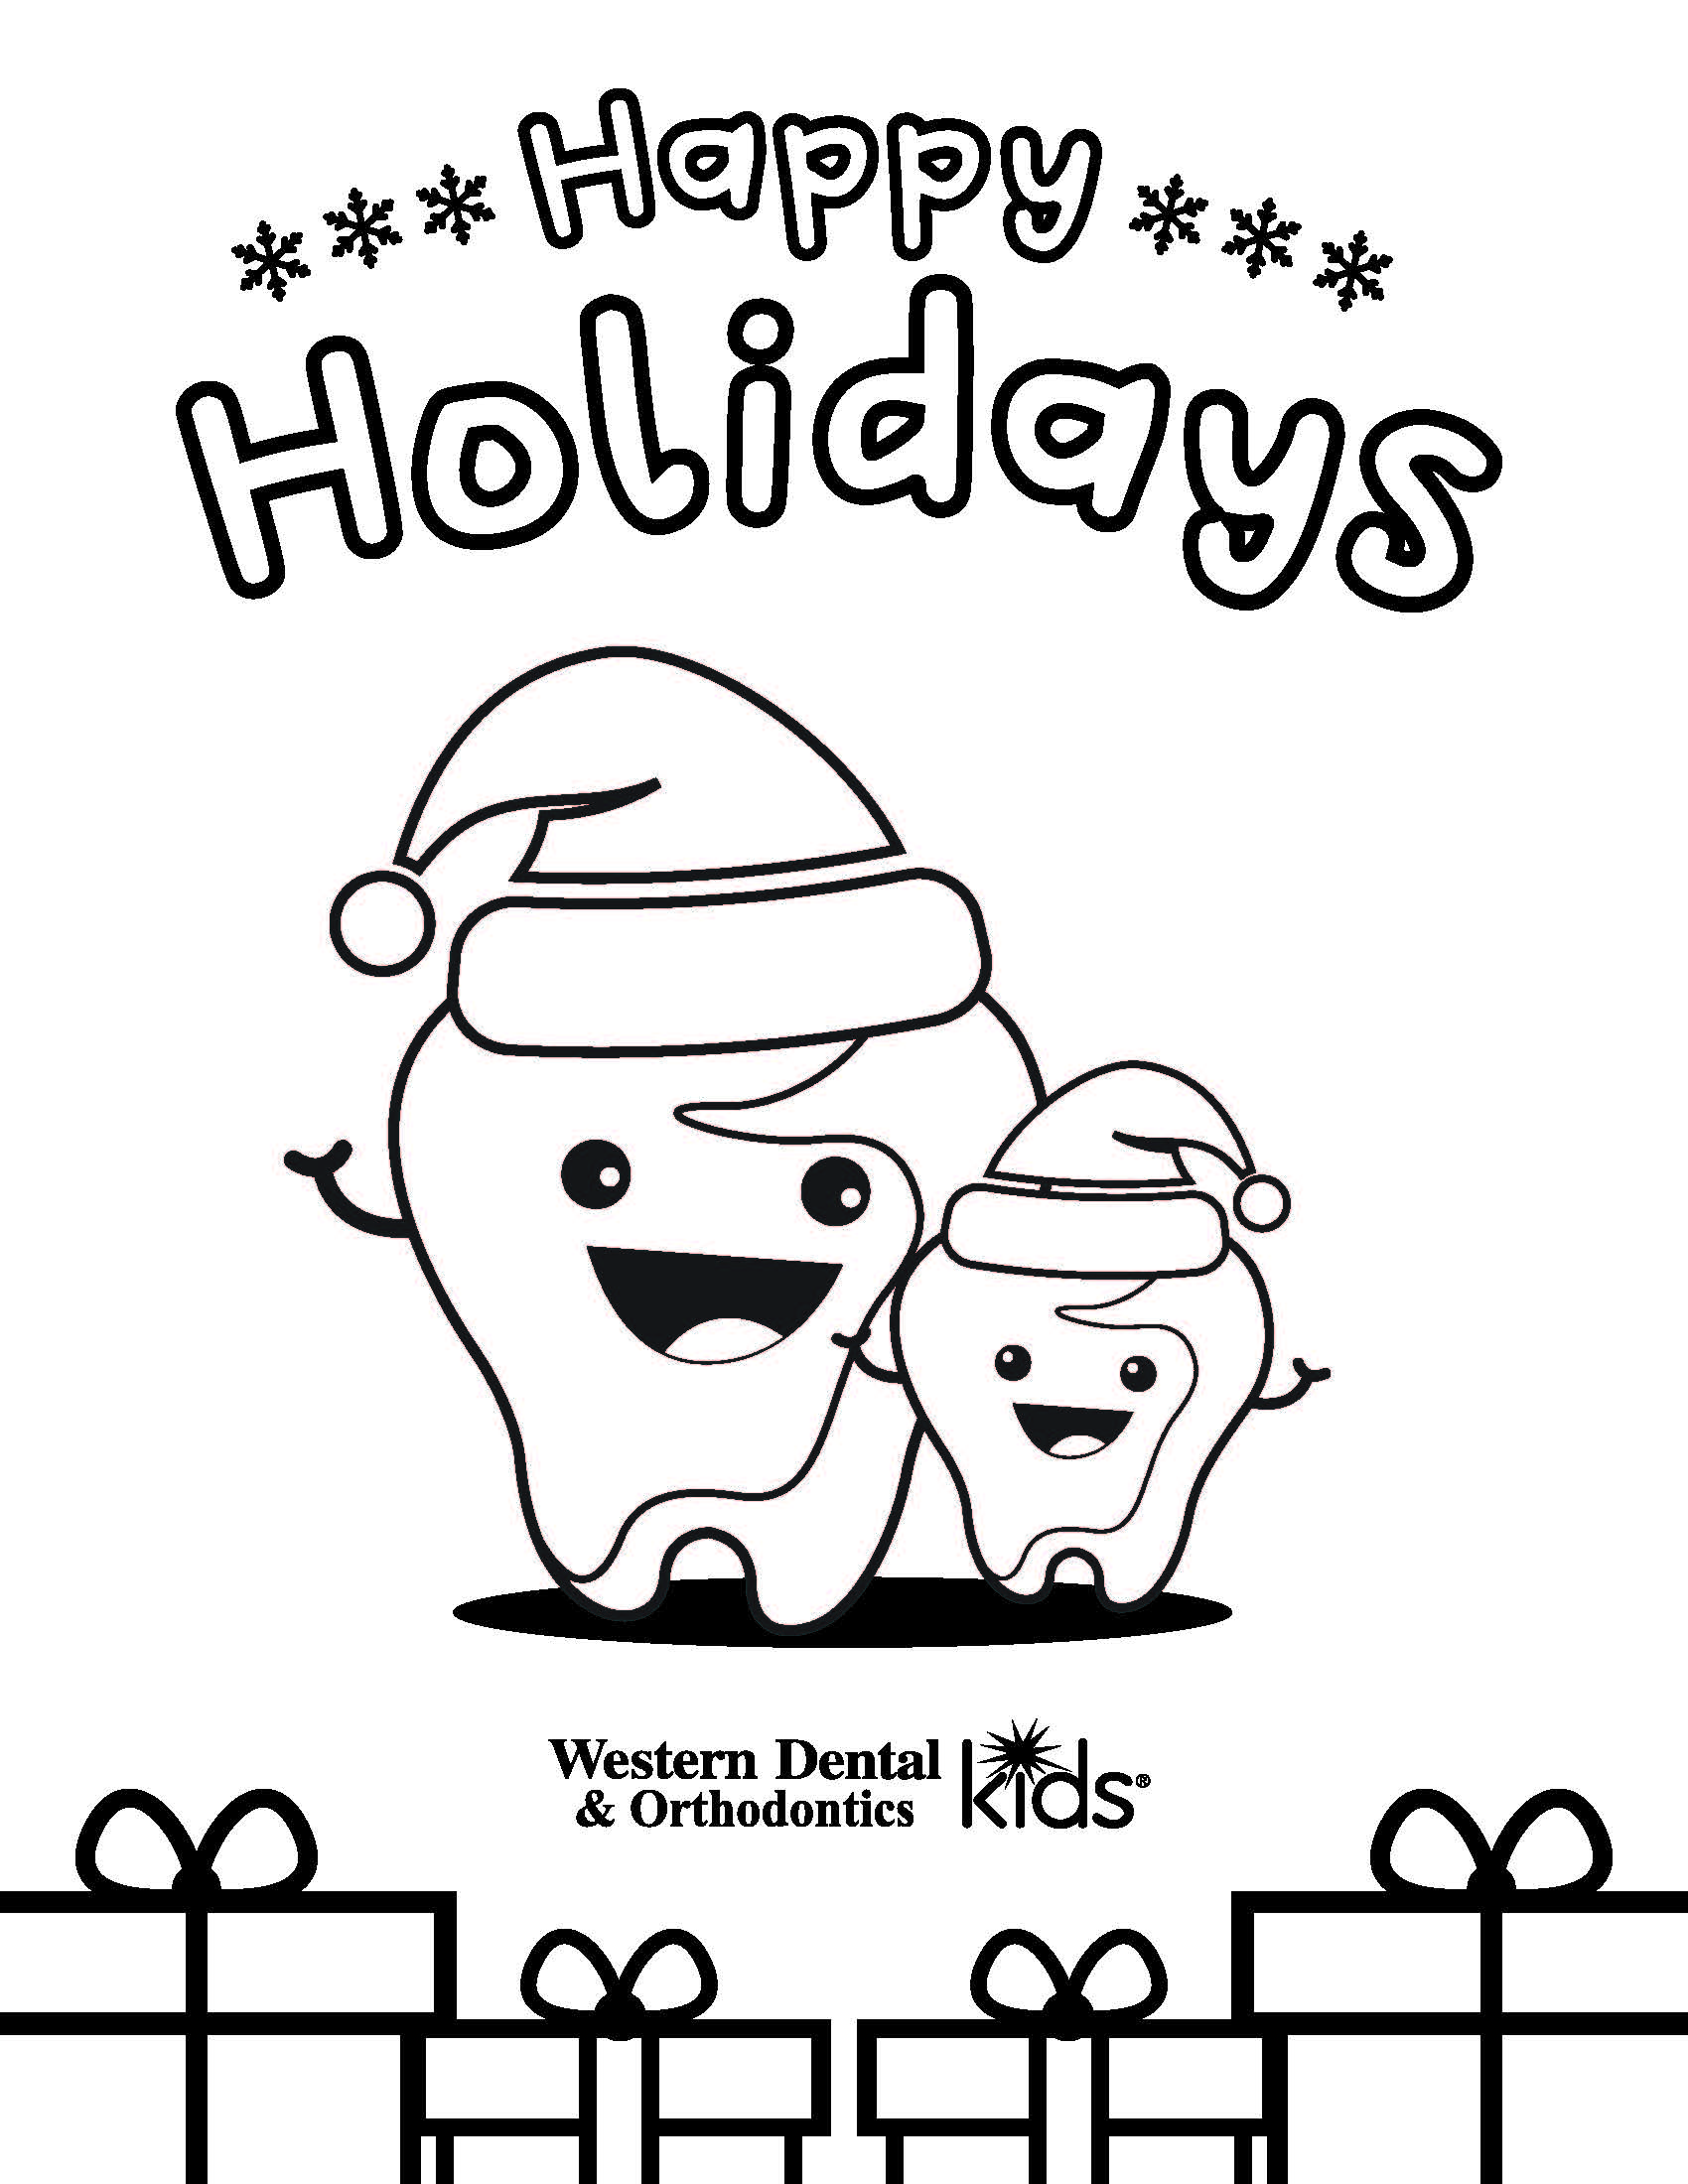 Western Dental Kids - Happy Holidays Coloring Page